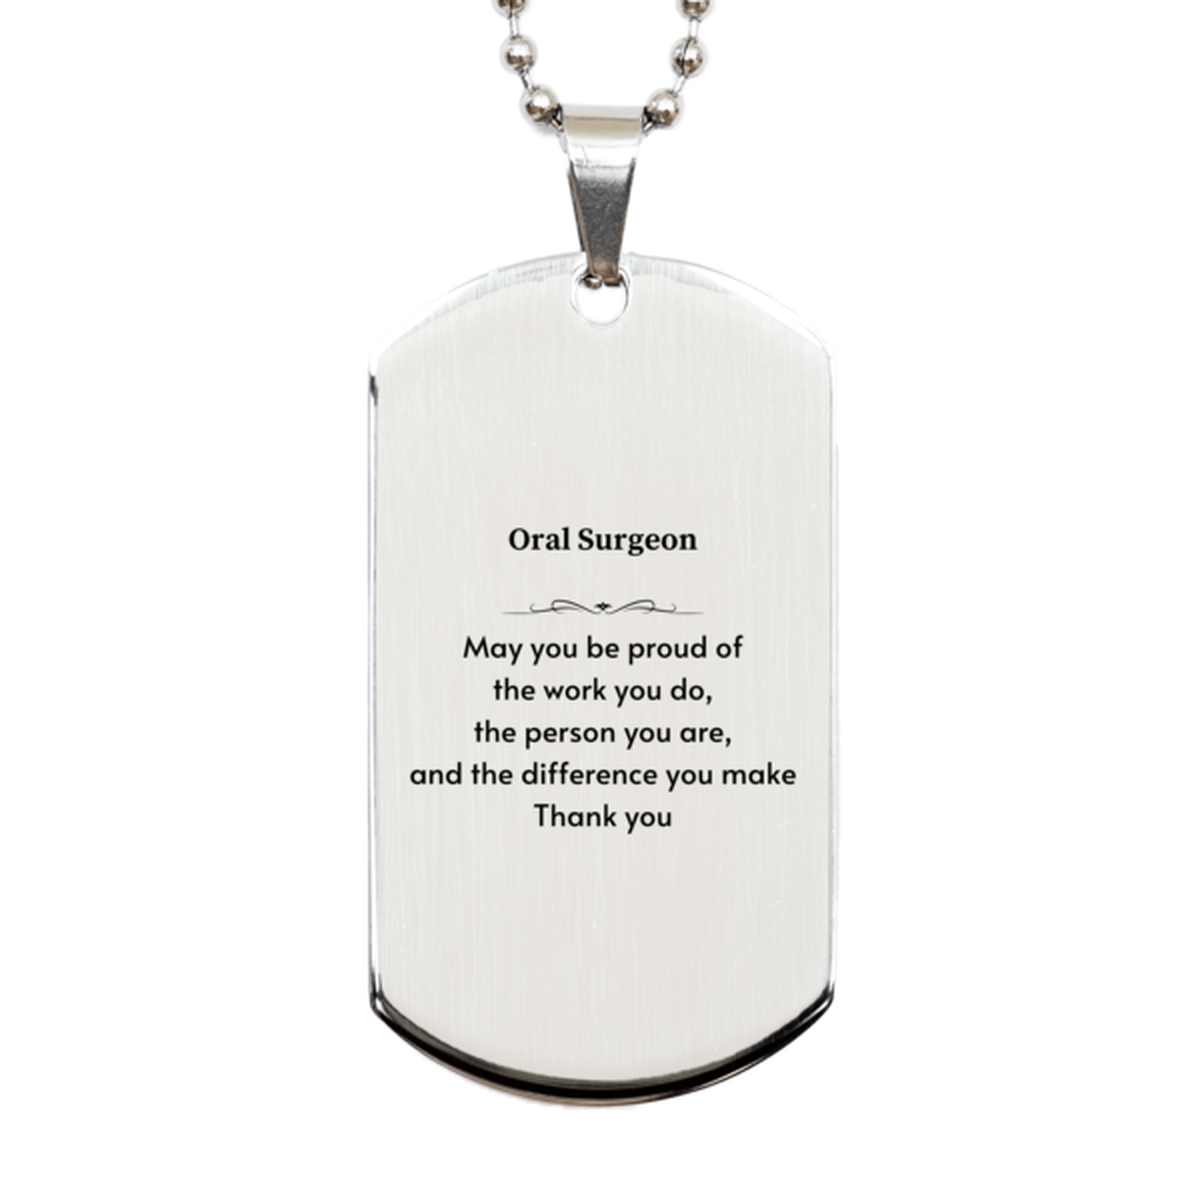 Heartwarming Silver Dog Tag Retirement Coworkers Gifts for Oral Surgeon, Oral Surgeon May You be proud of the work you do, the person you are Gifts for Boss Men Women Friends